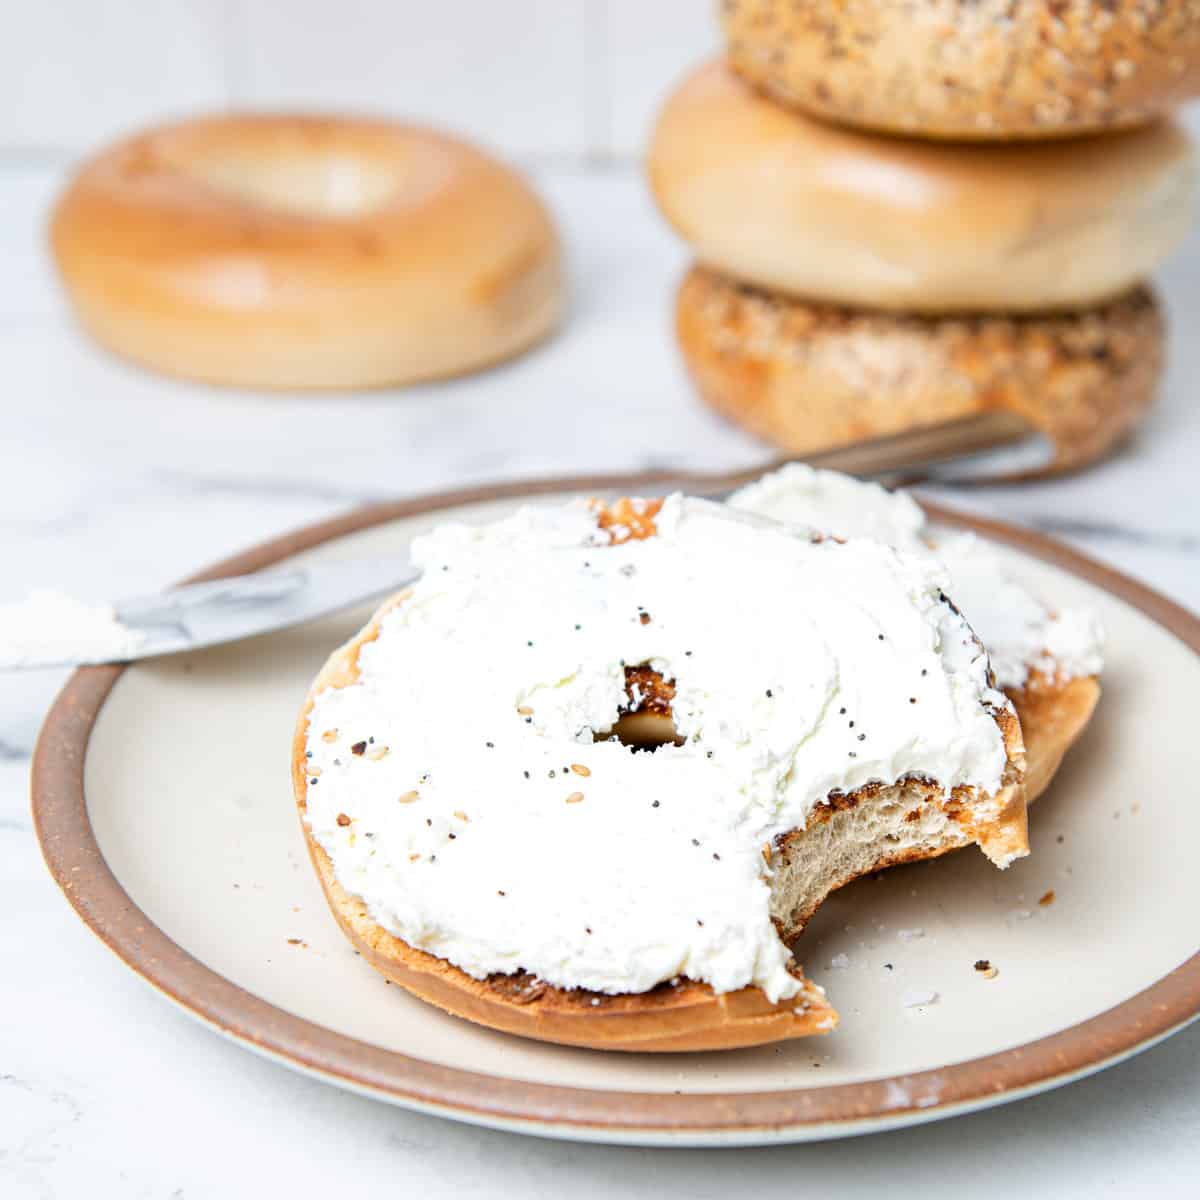 Bagel on plate with cream cheese spread.